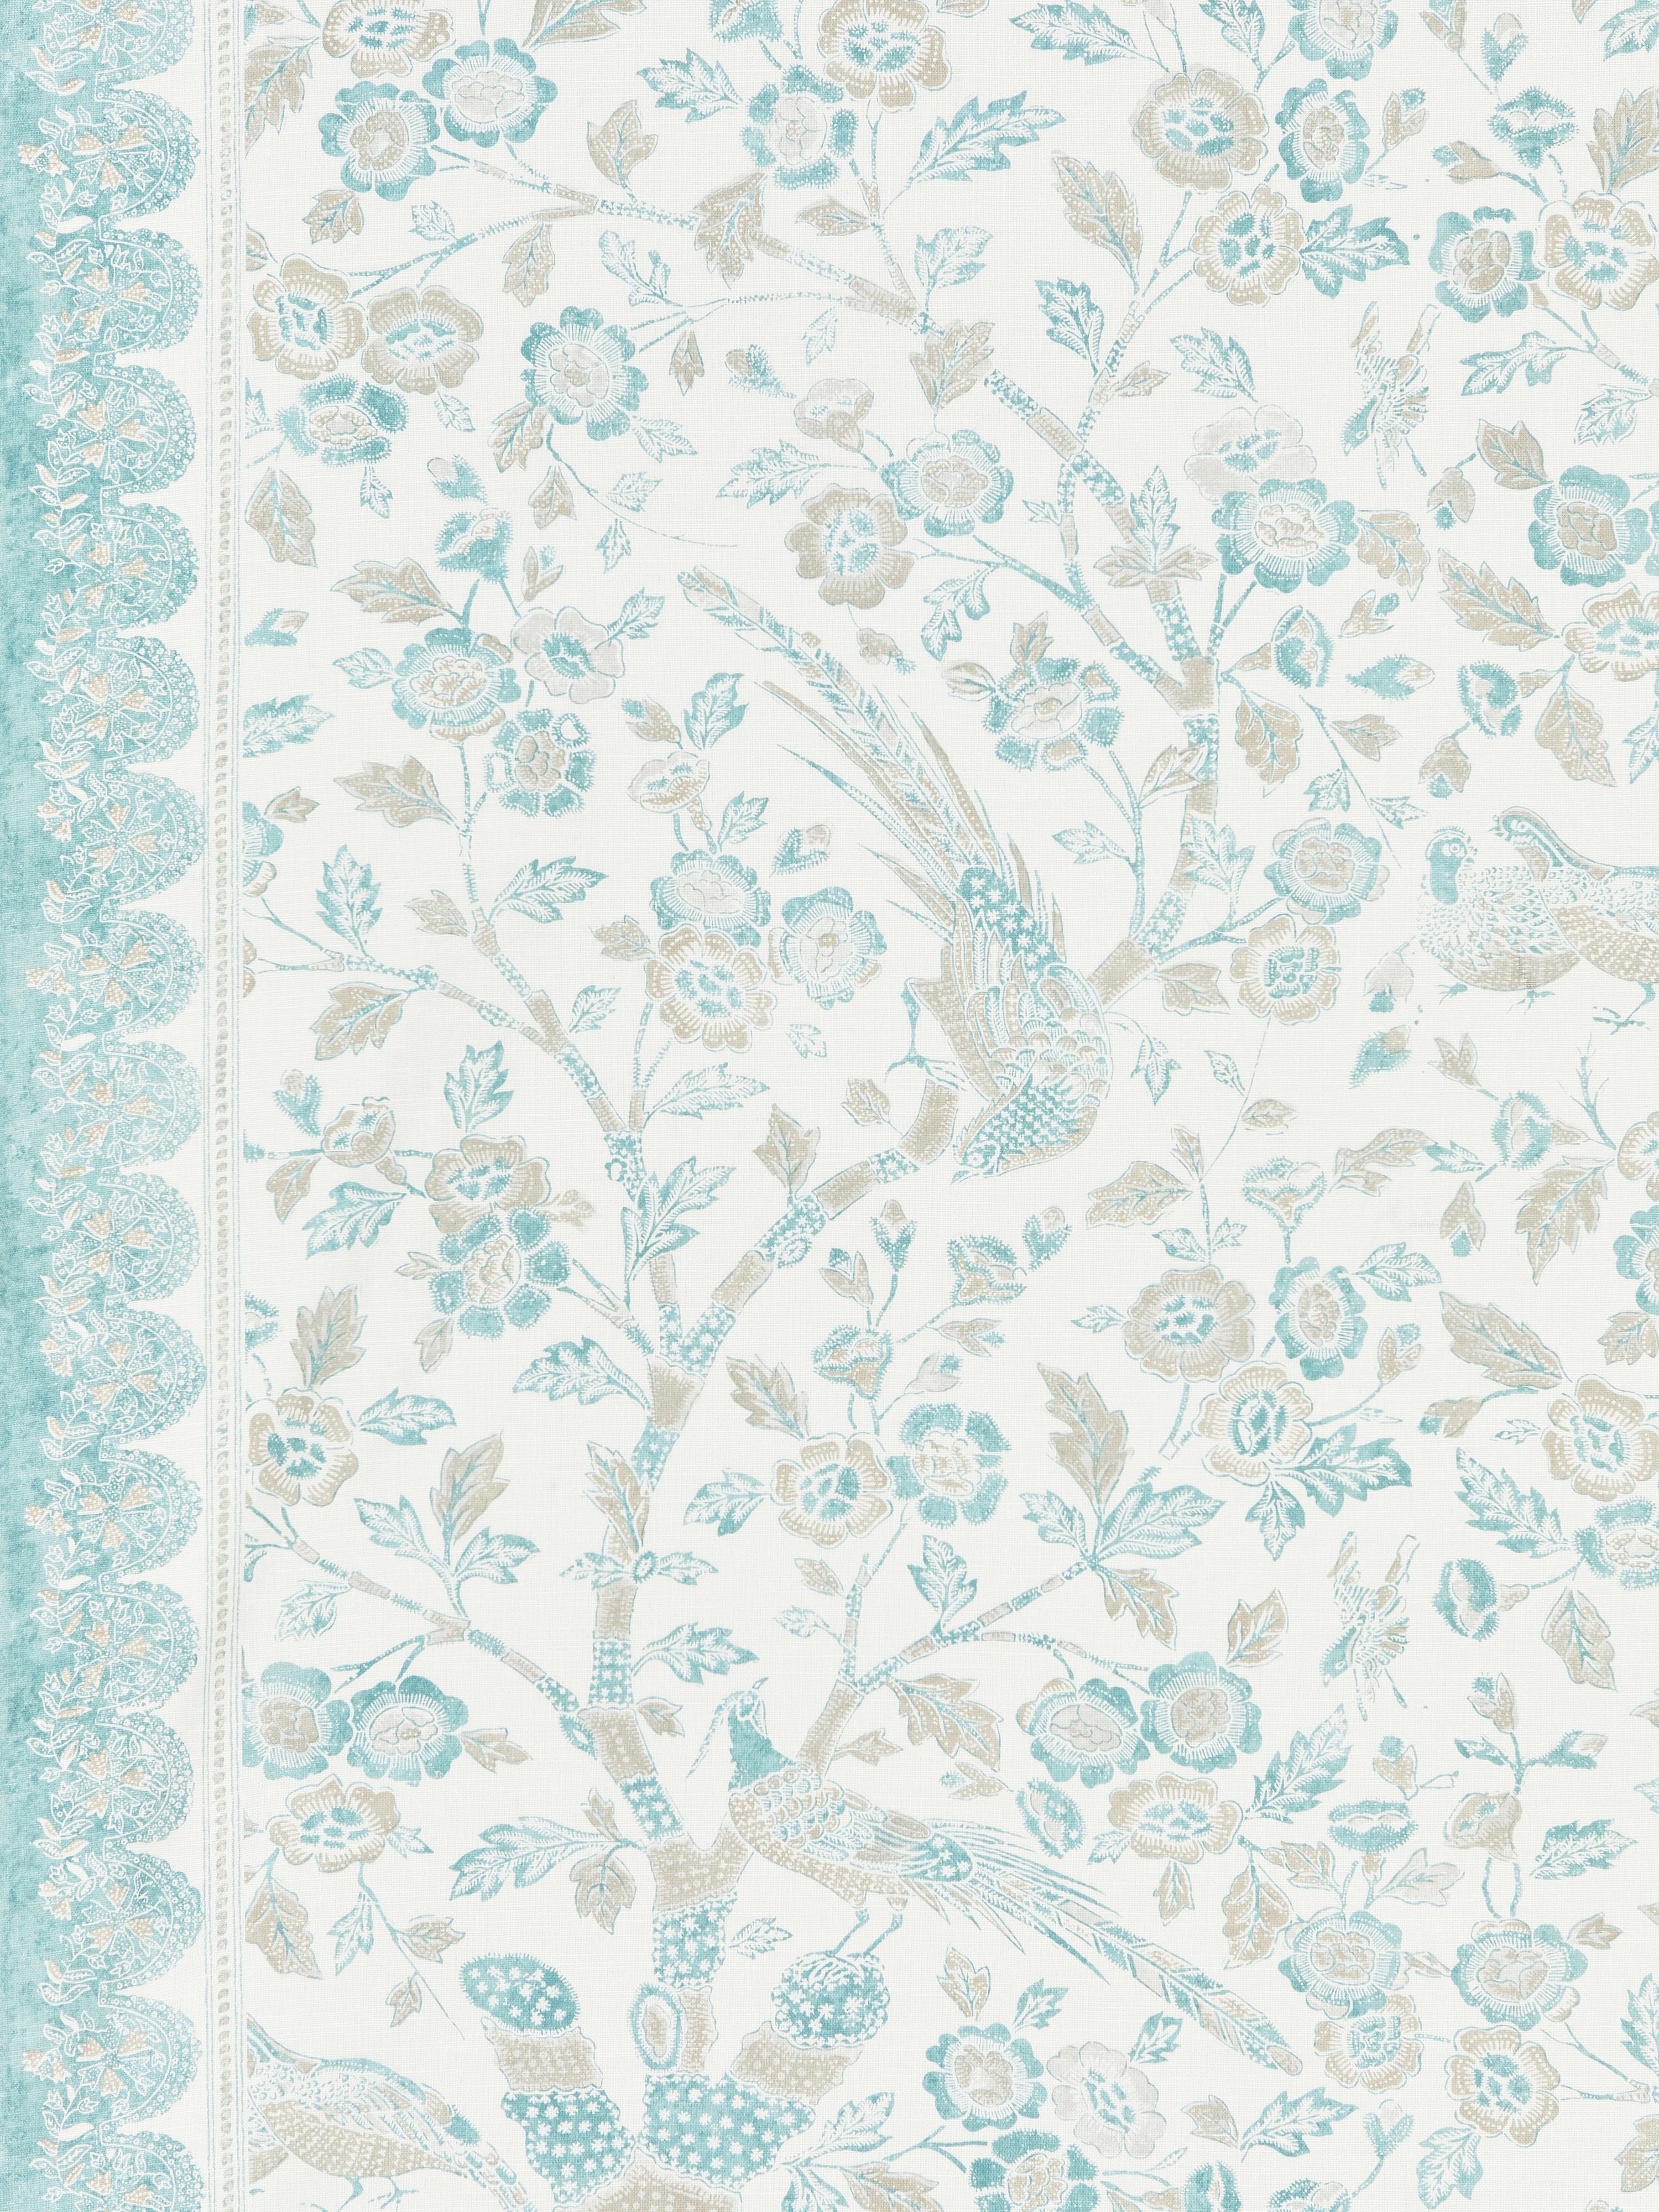 Anissa Print fabric in misty island color - pattern number SC 000116625 - by Scalamandre in the Scalamandre Fabrics Book 1 collection